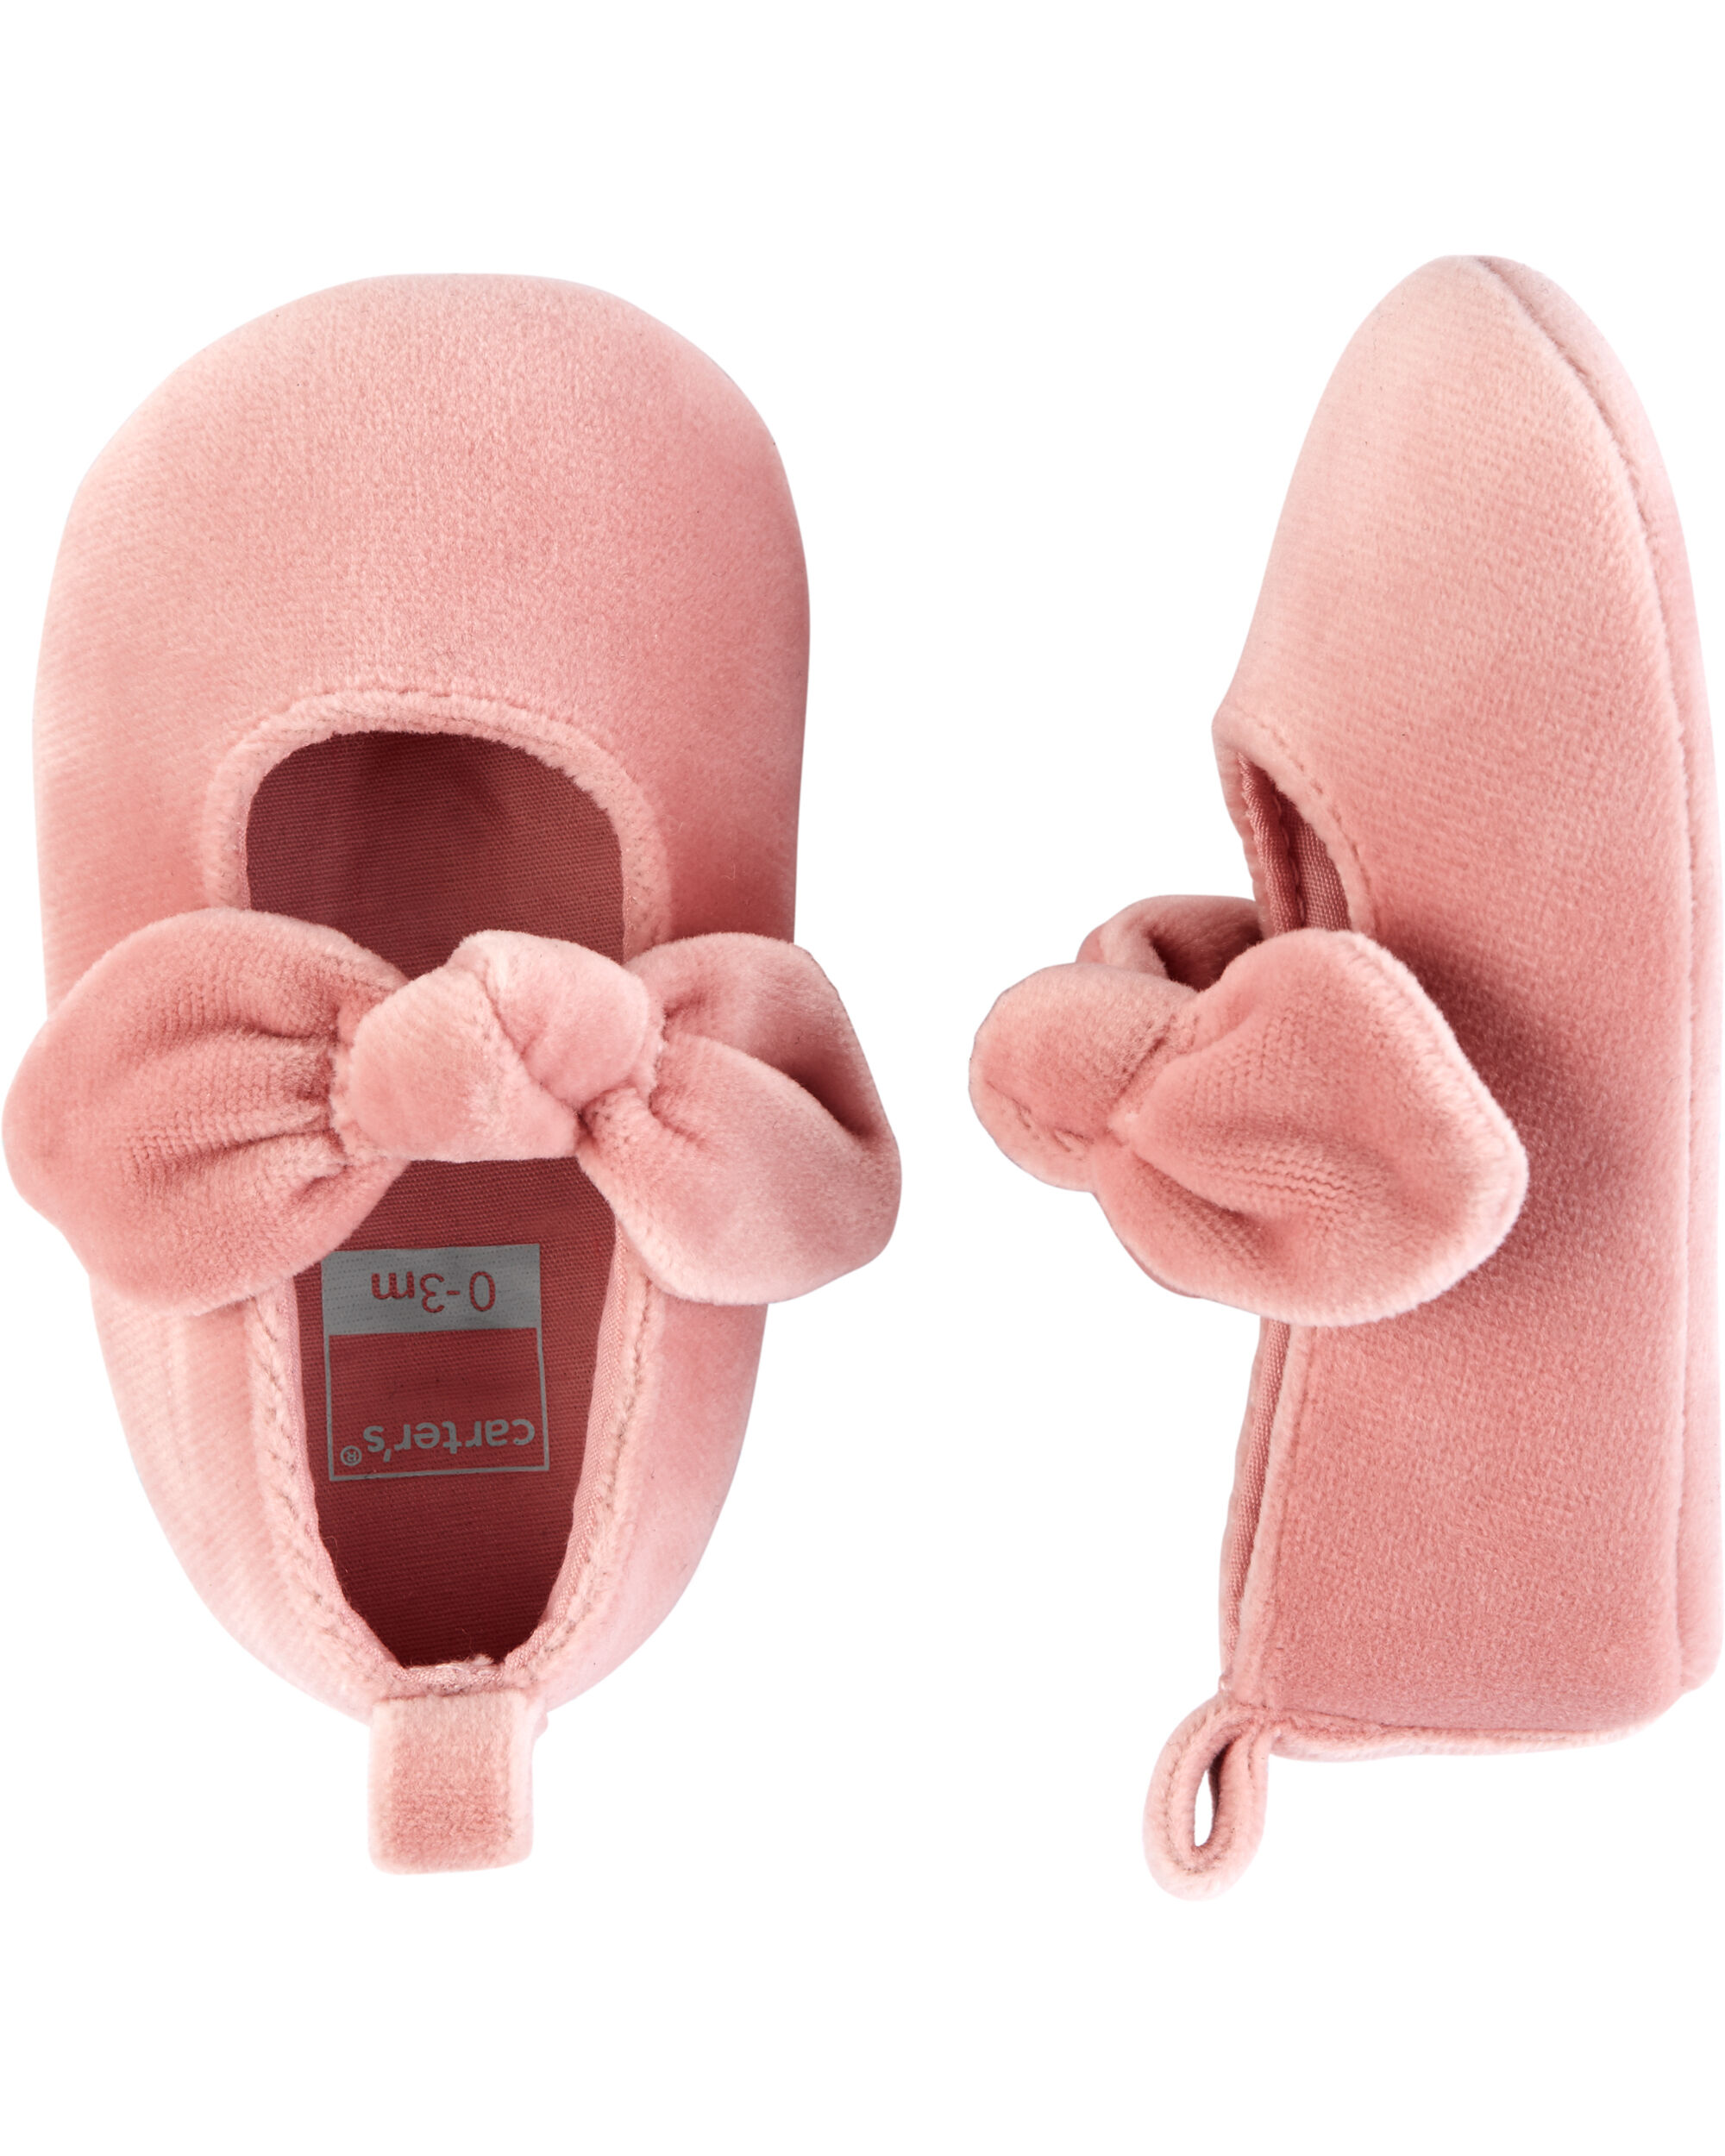 Carter's Mary Jane Baby Shoes | carters.com